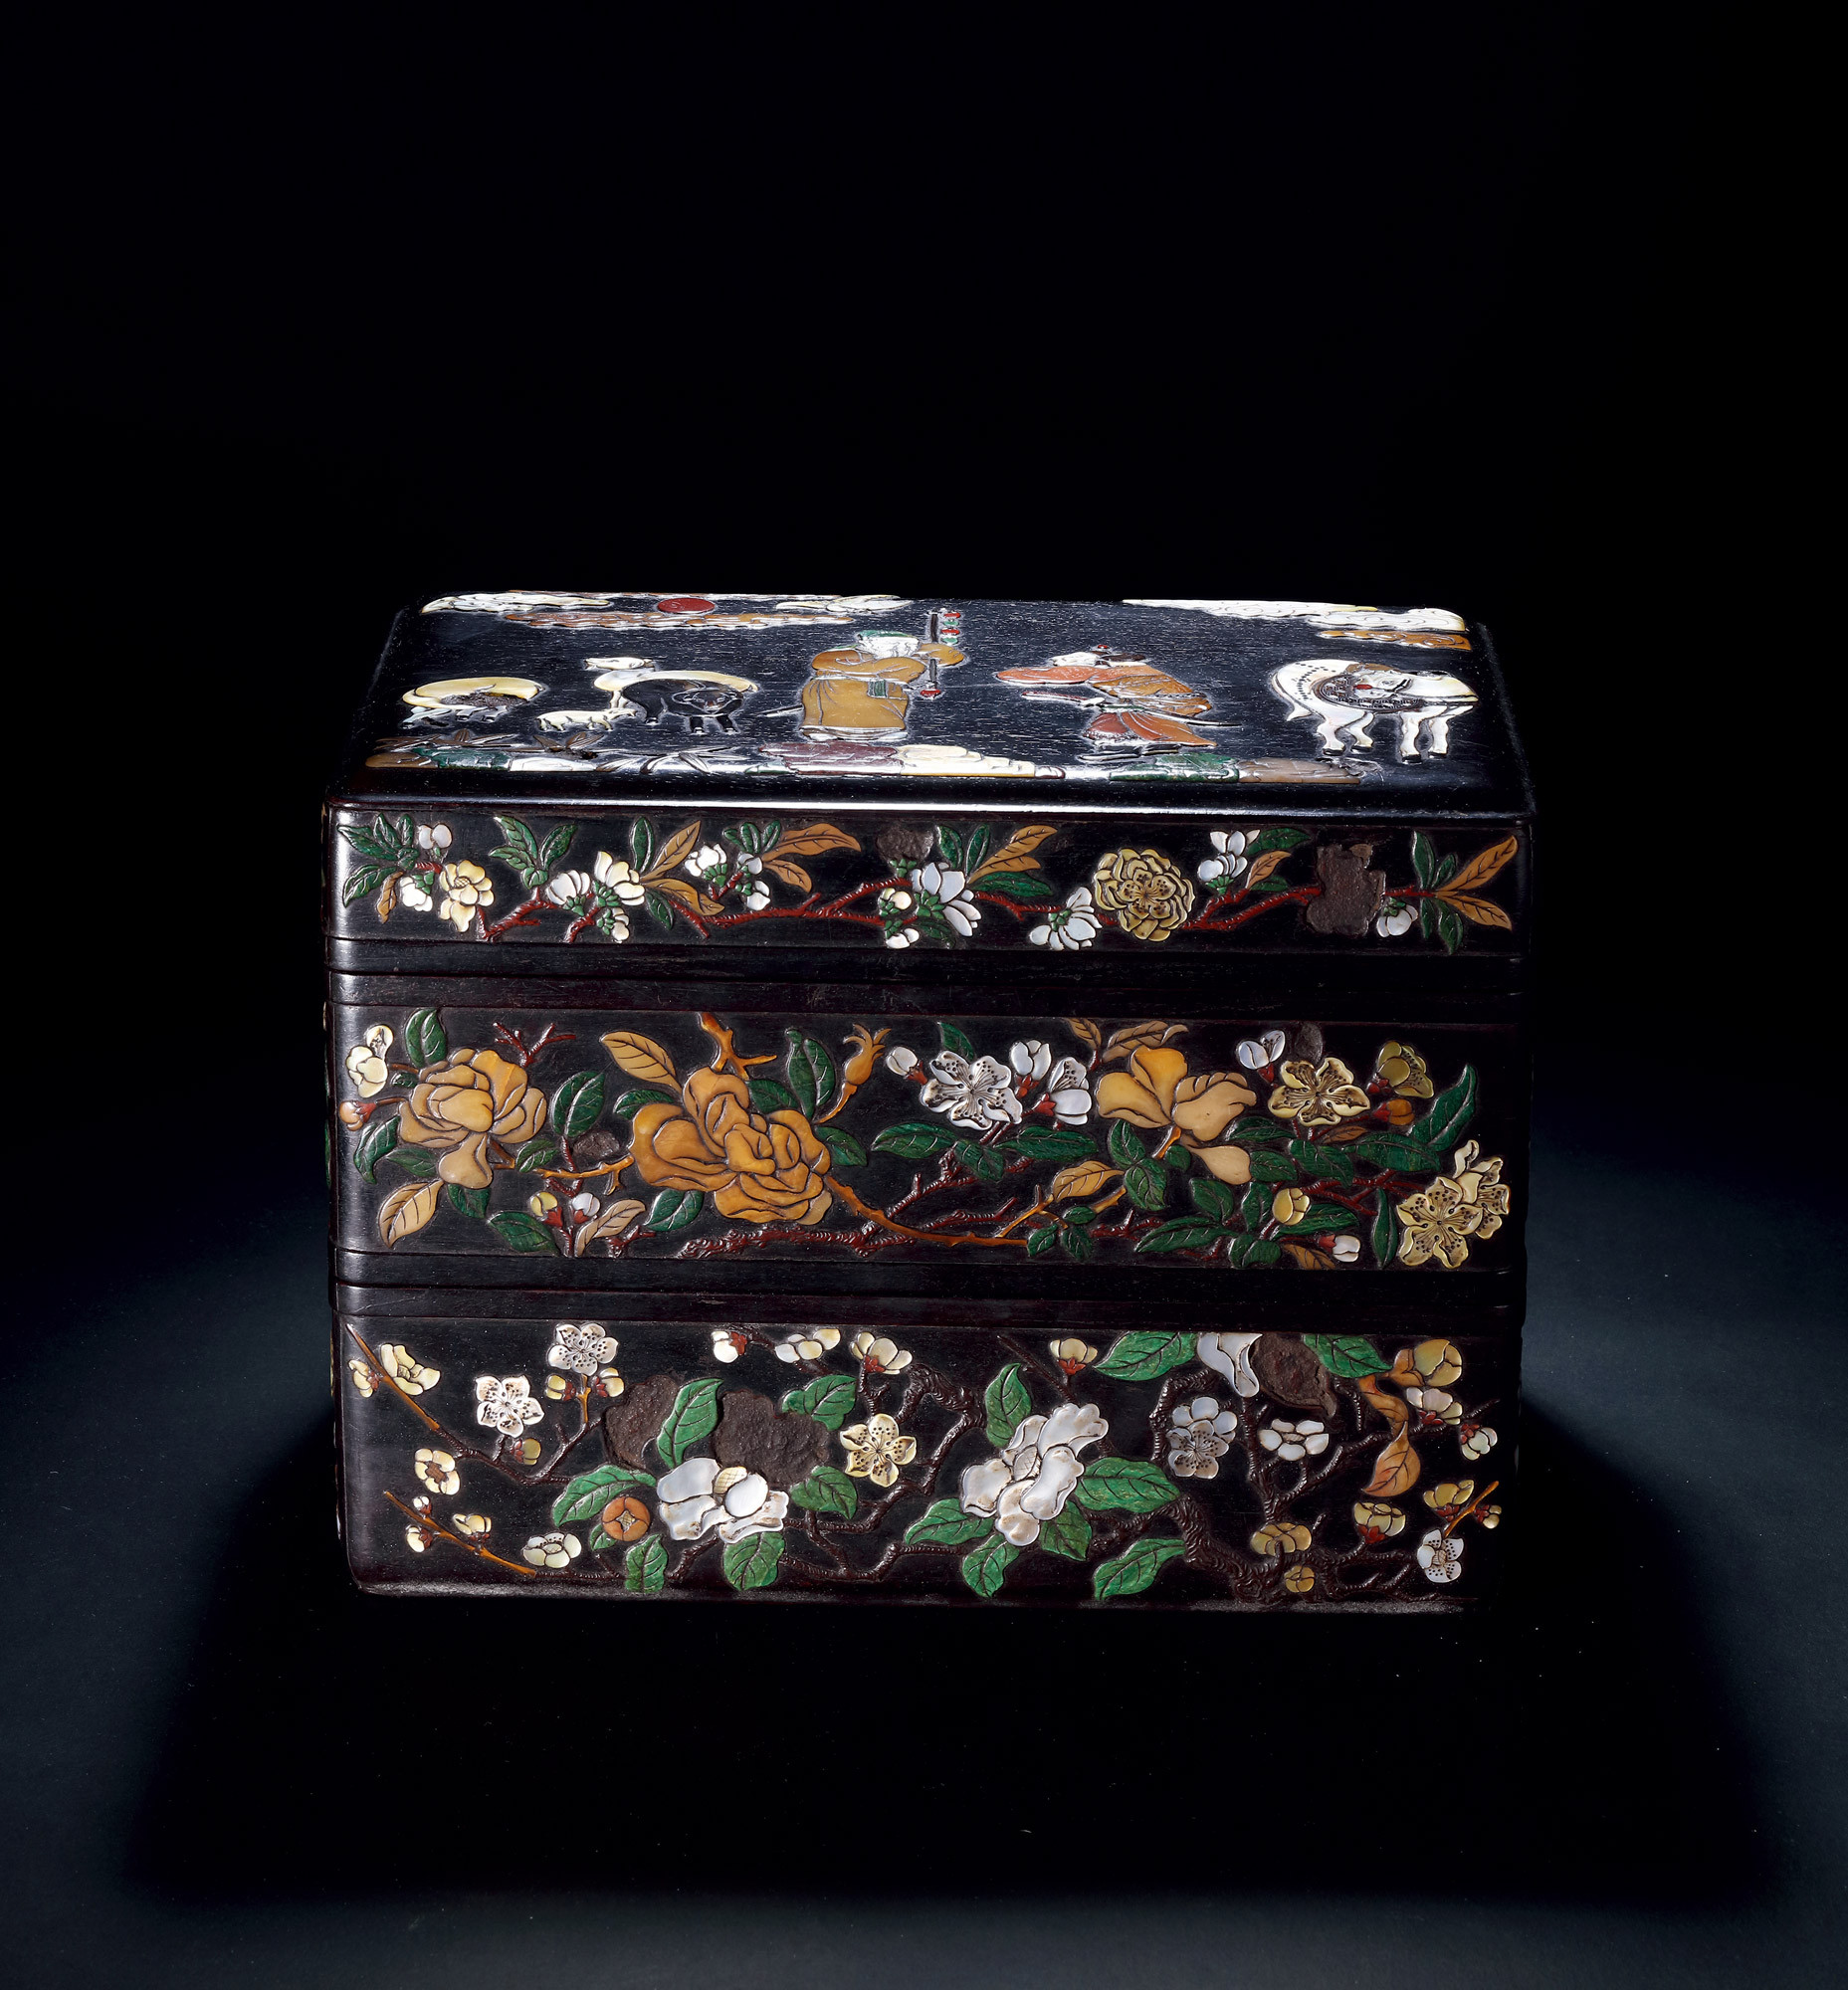 AN IMPERIAL ZITAN INLAID JADE AND MARBLE BOX WITH COVER